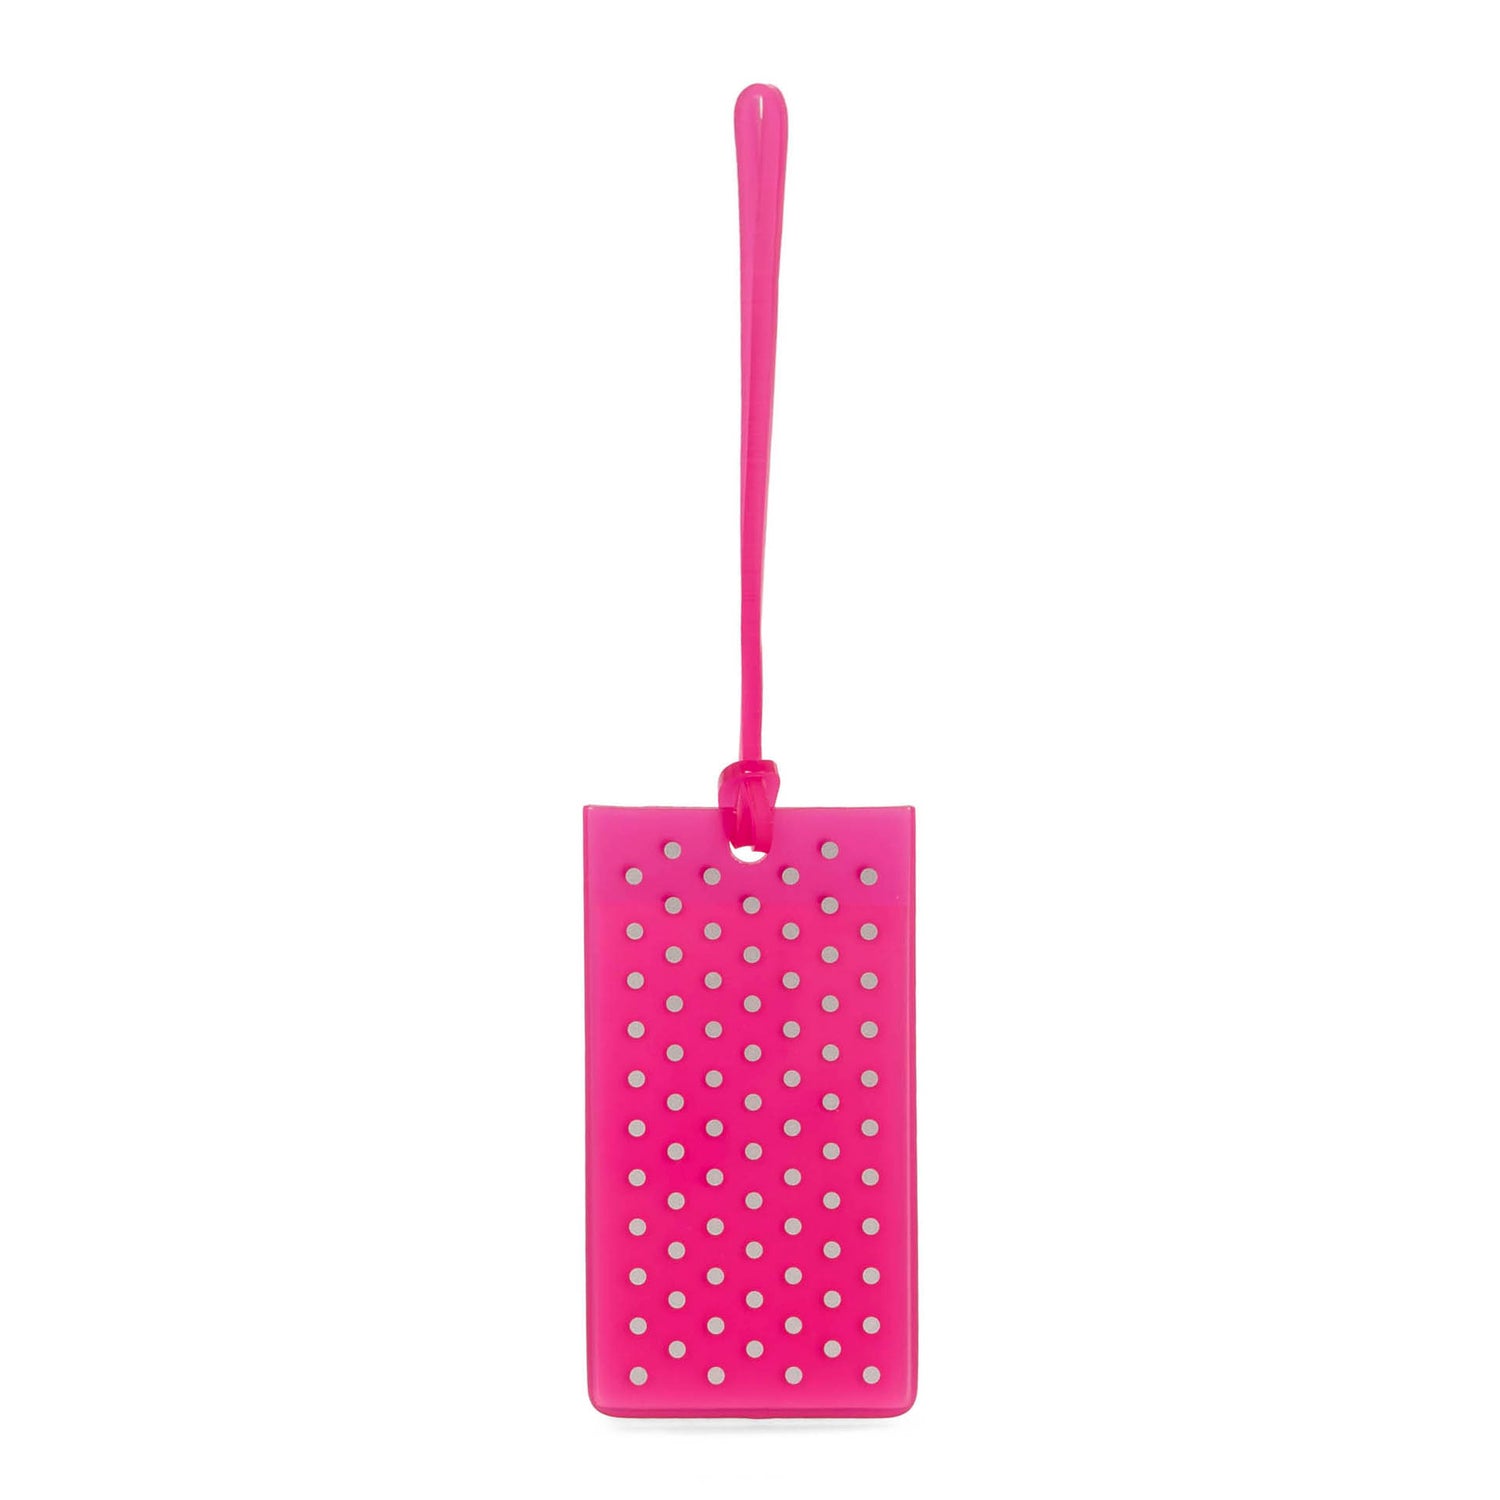 Front side of a luggage id tag called Polka Dot Jelly Luggage Tag designed by Tracker showing its jelly-like texture, elongated strap, and polka dot pattern.